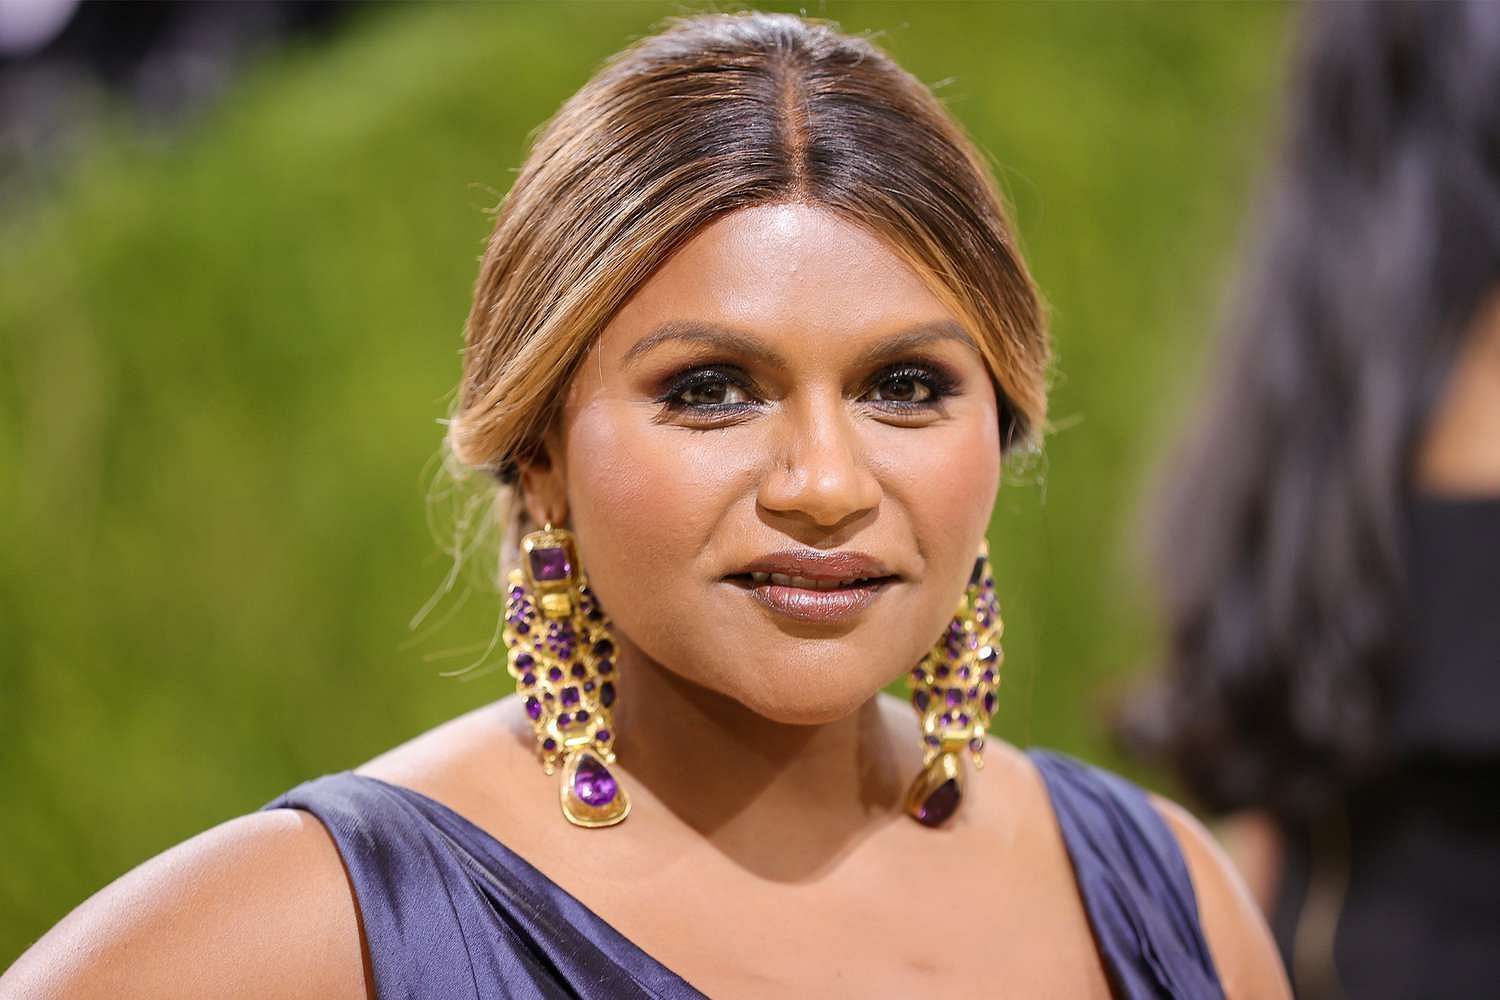 Mindy Kaling, creator of the Velma series, has deleted her tweets promoting the show after its poor reception (Image via Getty)